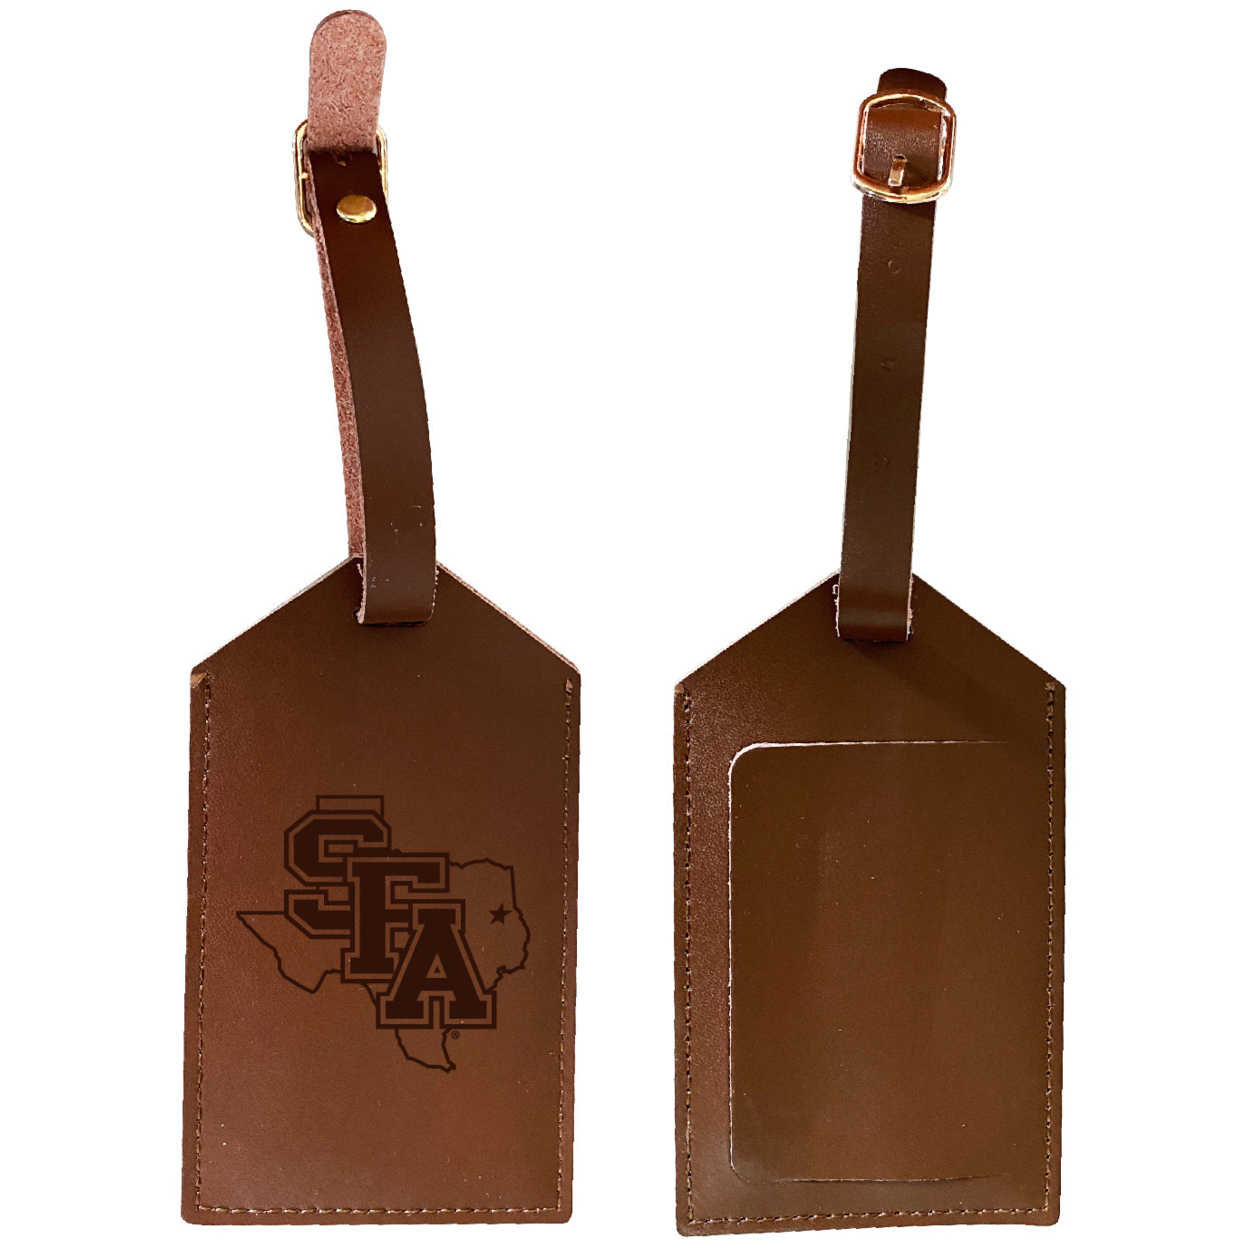 Stephen F. Austin State University Leather Luggage Tag Engraved